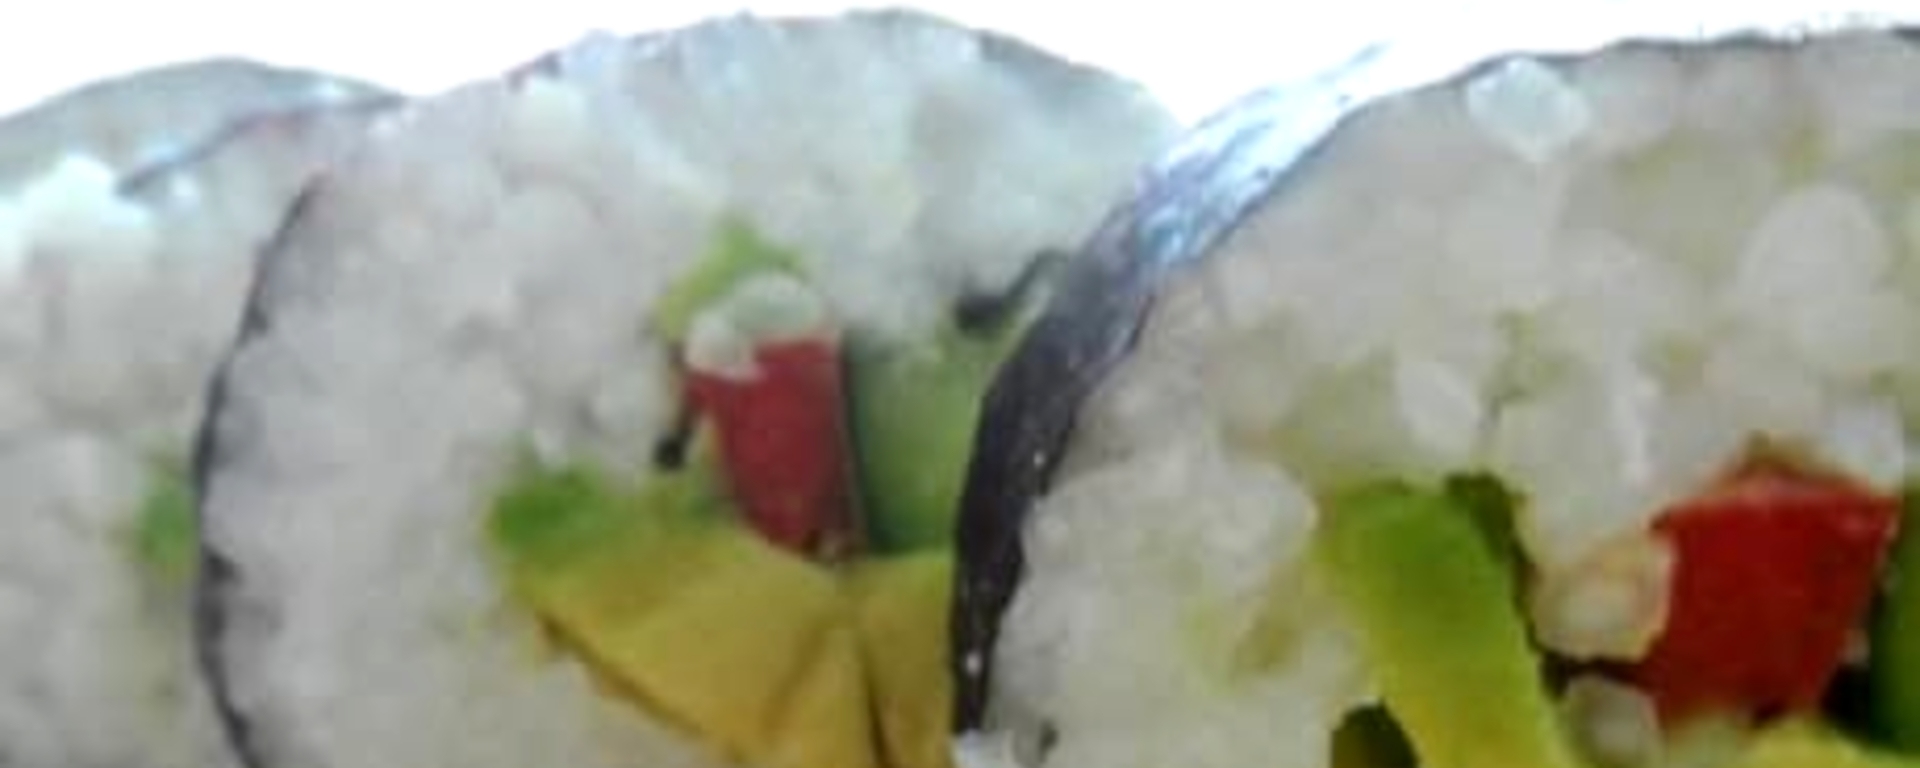 Vegan Sushi with Avocado, Bell Pepper and Cucumber